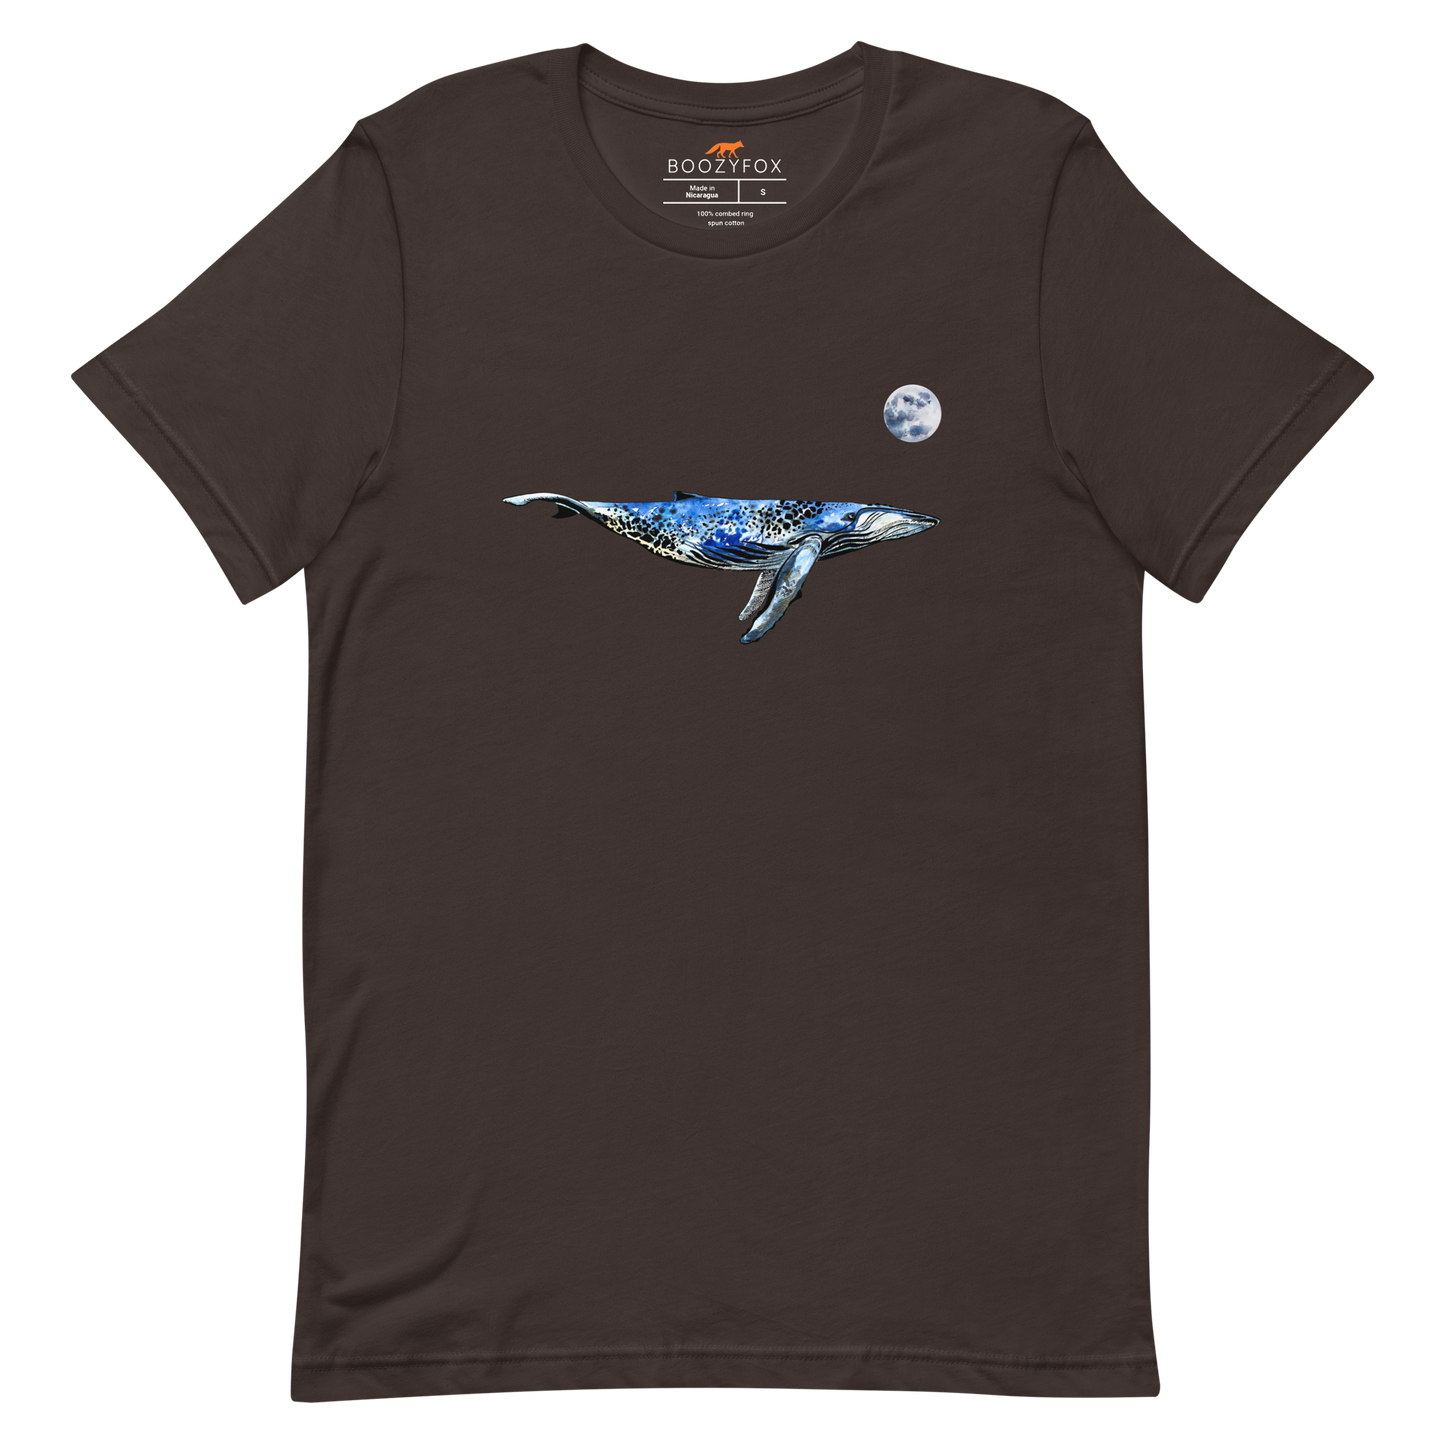 Brown Premium Whale T-Shirt featuring majestic Whale Under The Moon graphic on the chest - Cool Graphic Whale Tees - Boozy Fox